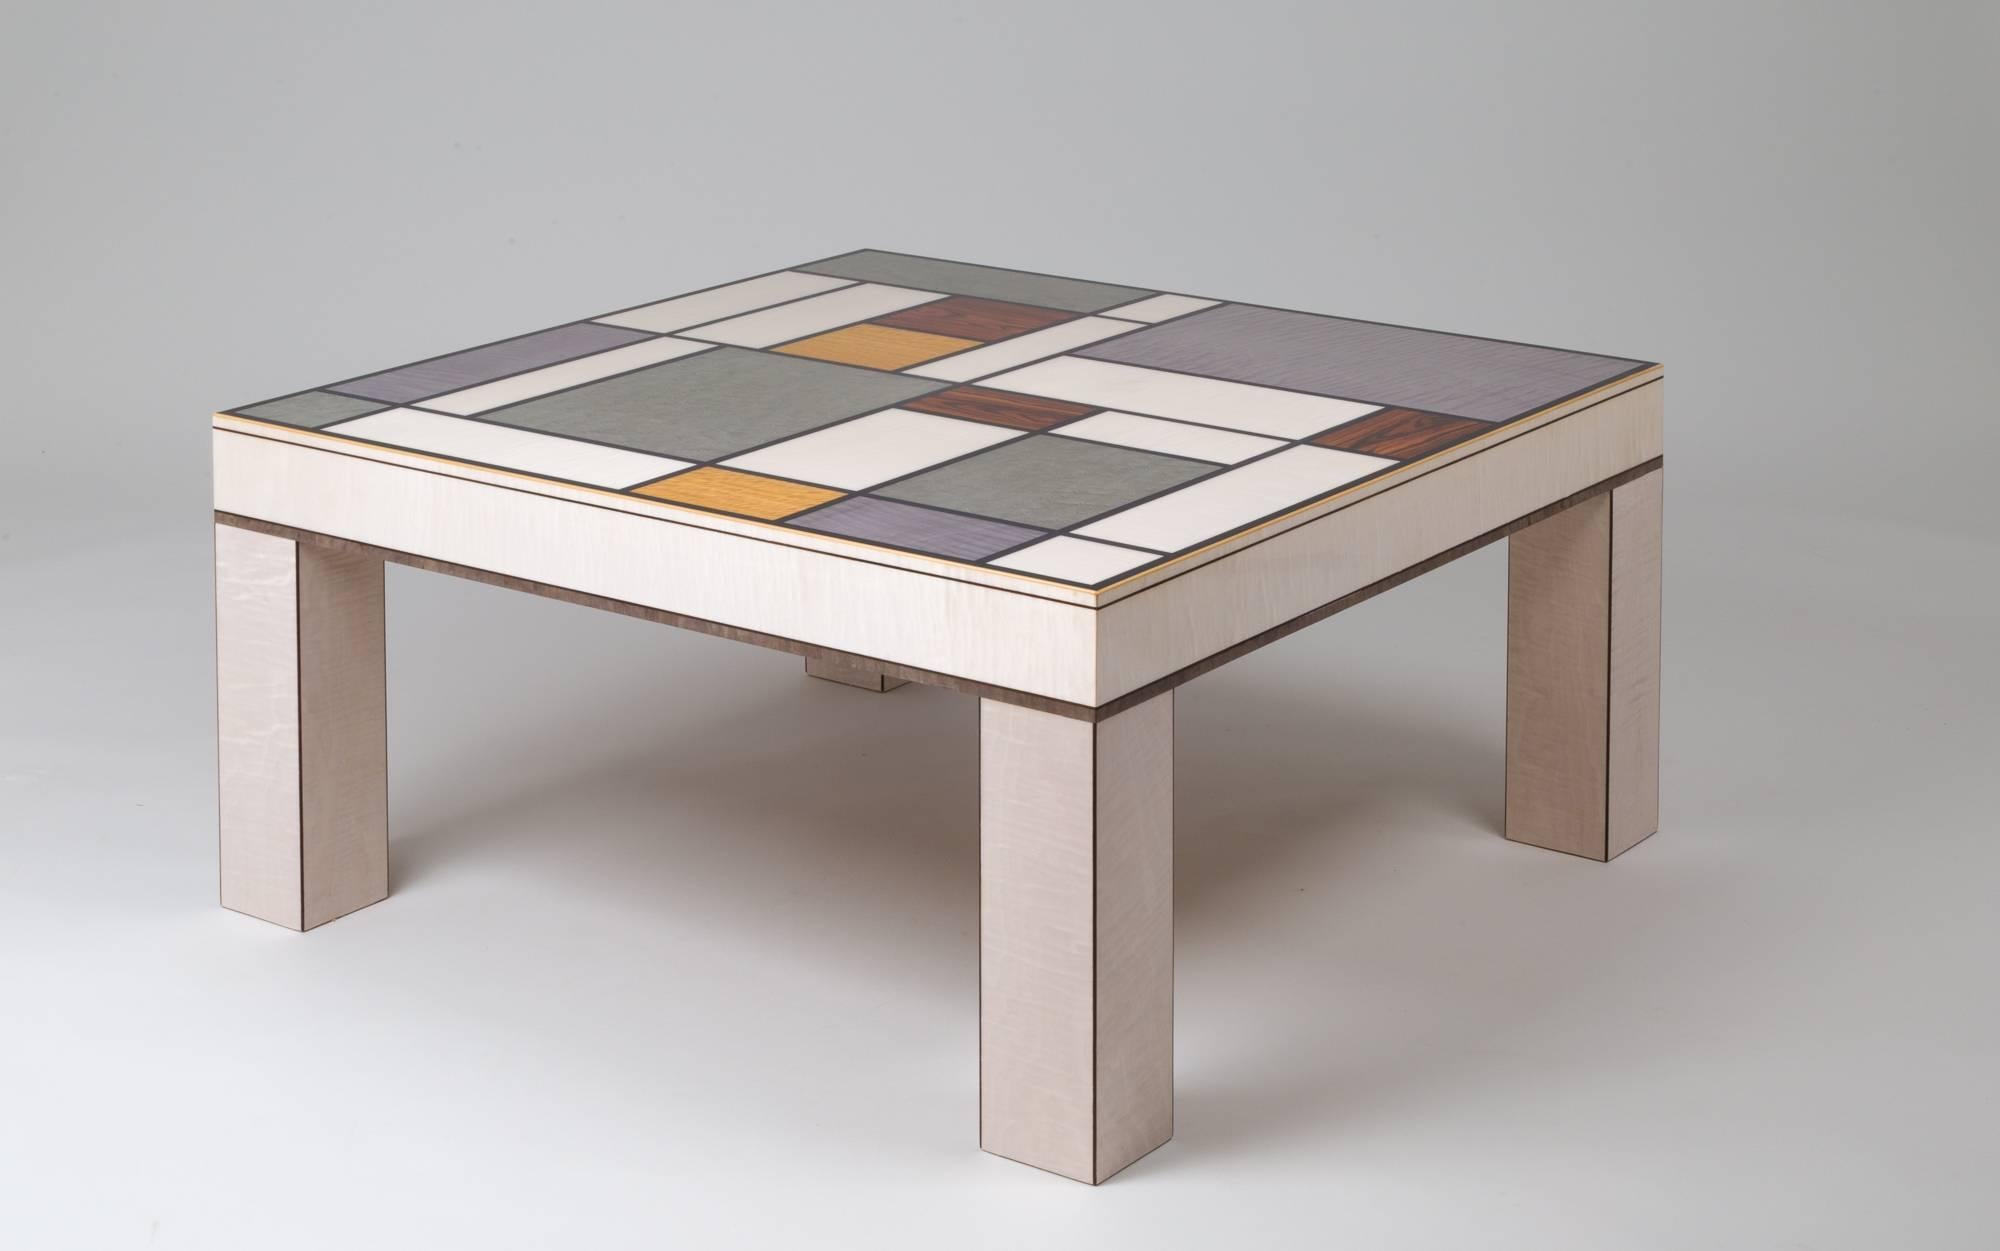 This most vibrant coffee table showcases an impressive array of colourful veneers. Beeswing satinwood, maple, kingwood and various sycamores link together in a well-balanced montage.
Our designer took his inspiration from the artist Mondrian, a